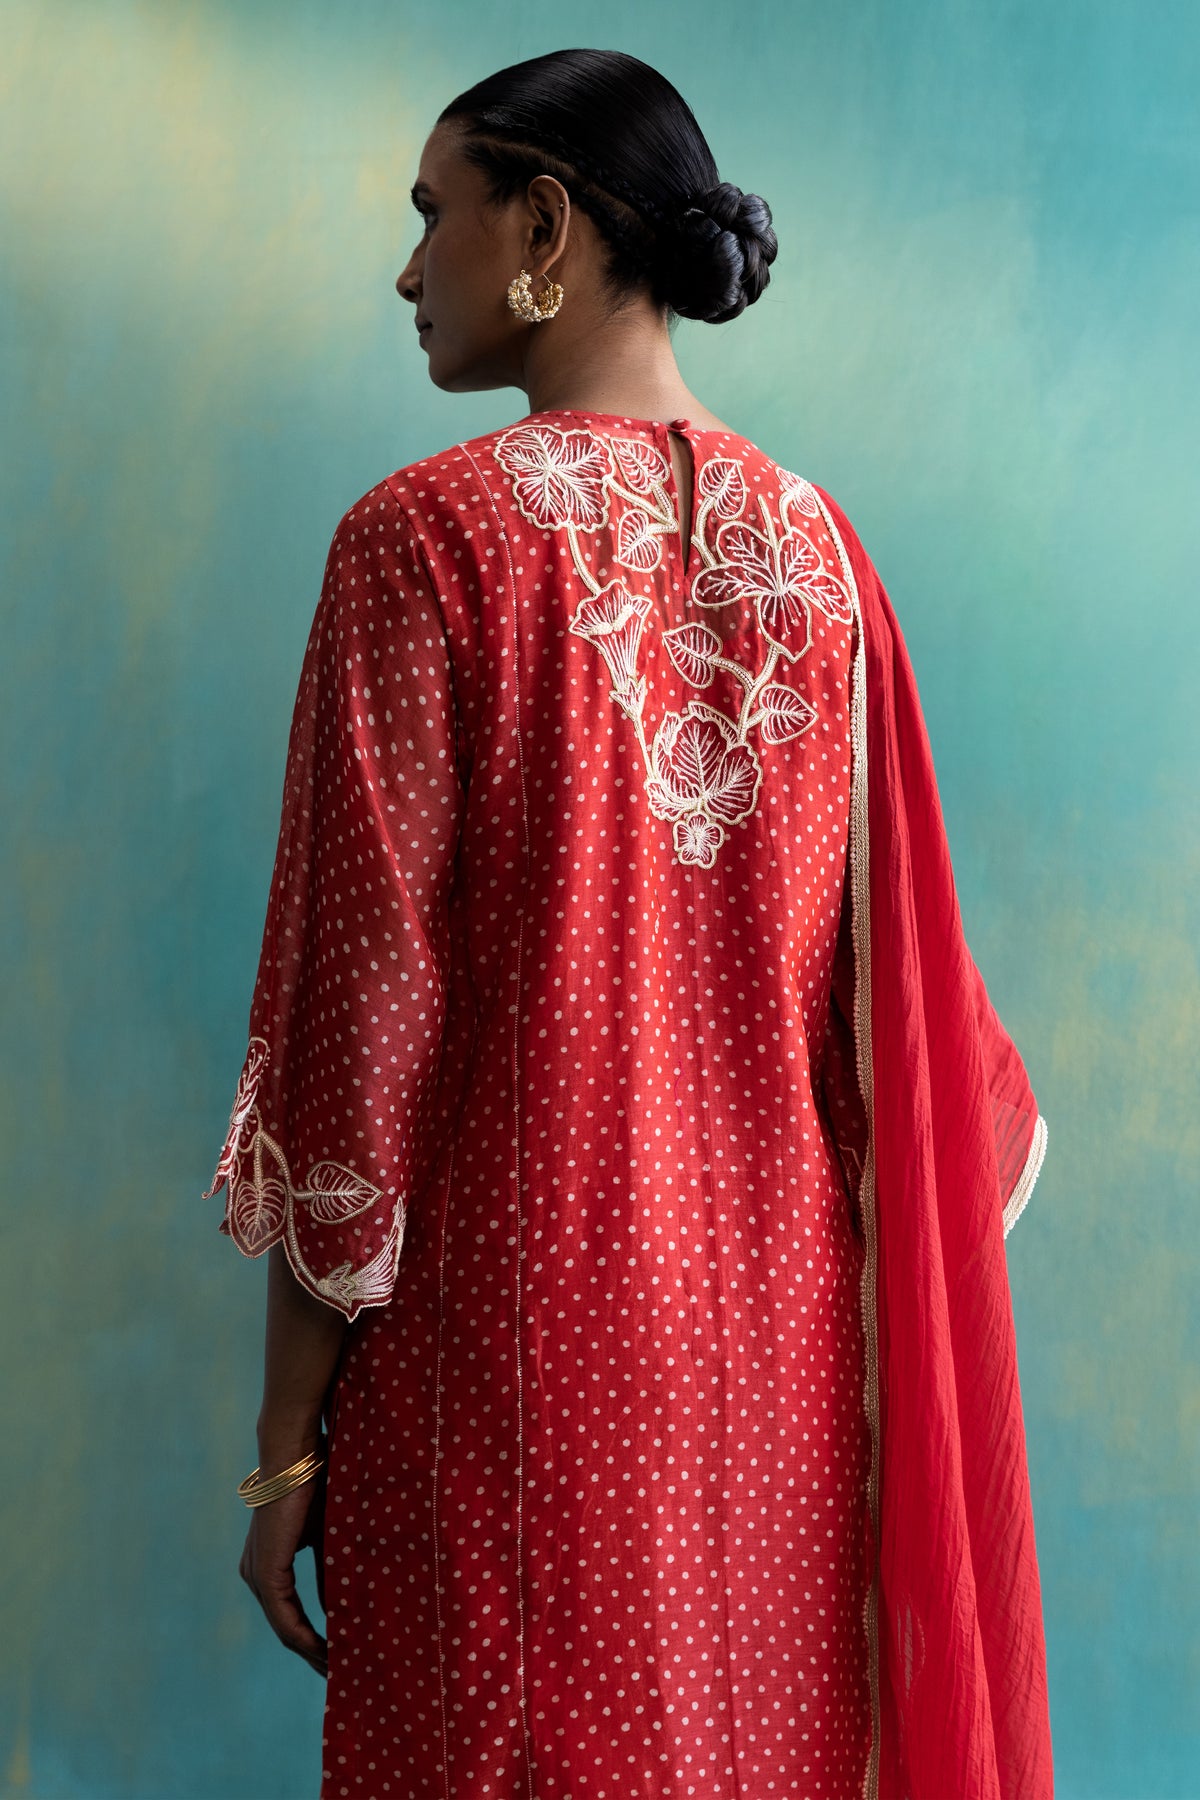 DIL-KASH RED CHANDERI KURTA WITH LONG YOKE FLORAL EMBROIDERY ON POLKA